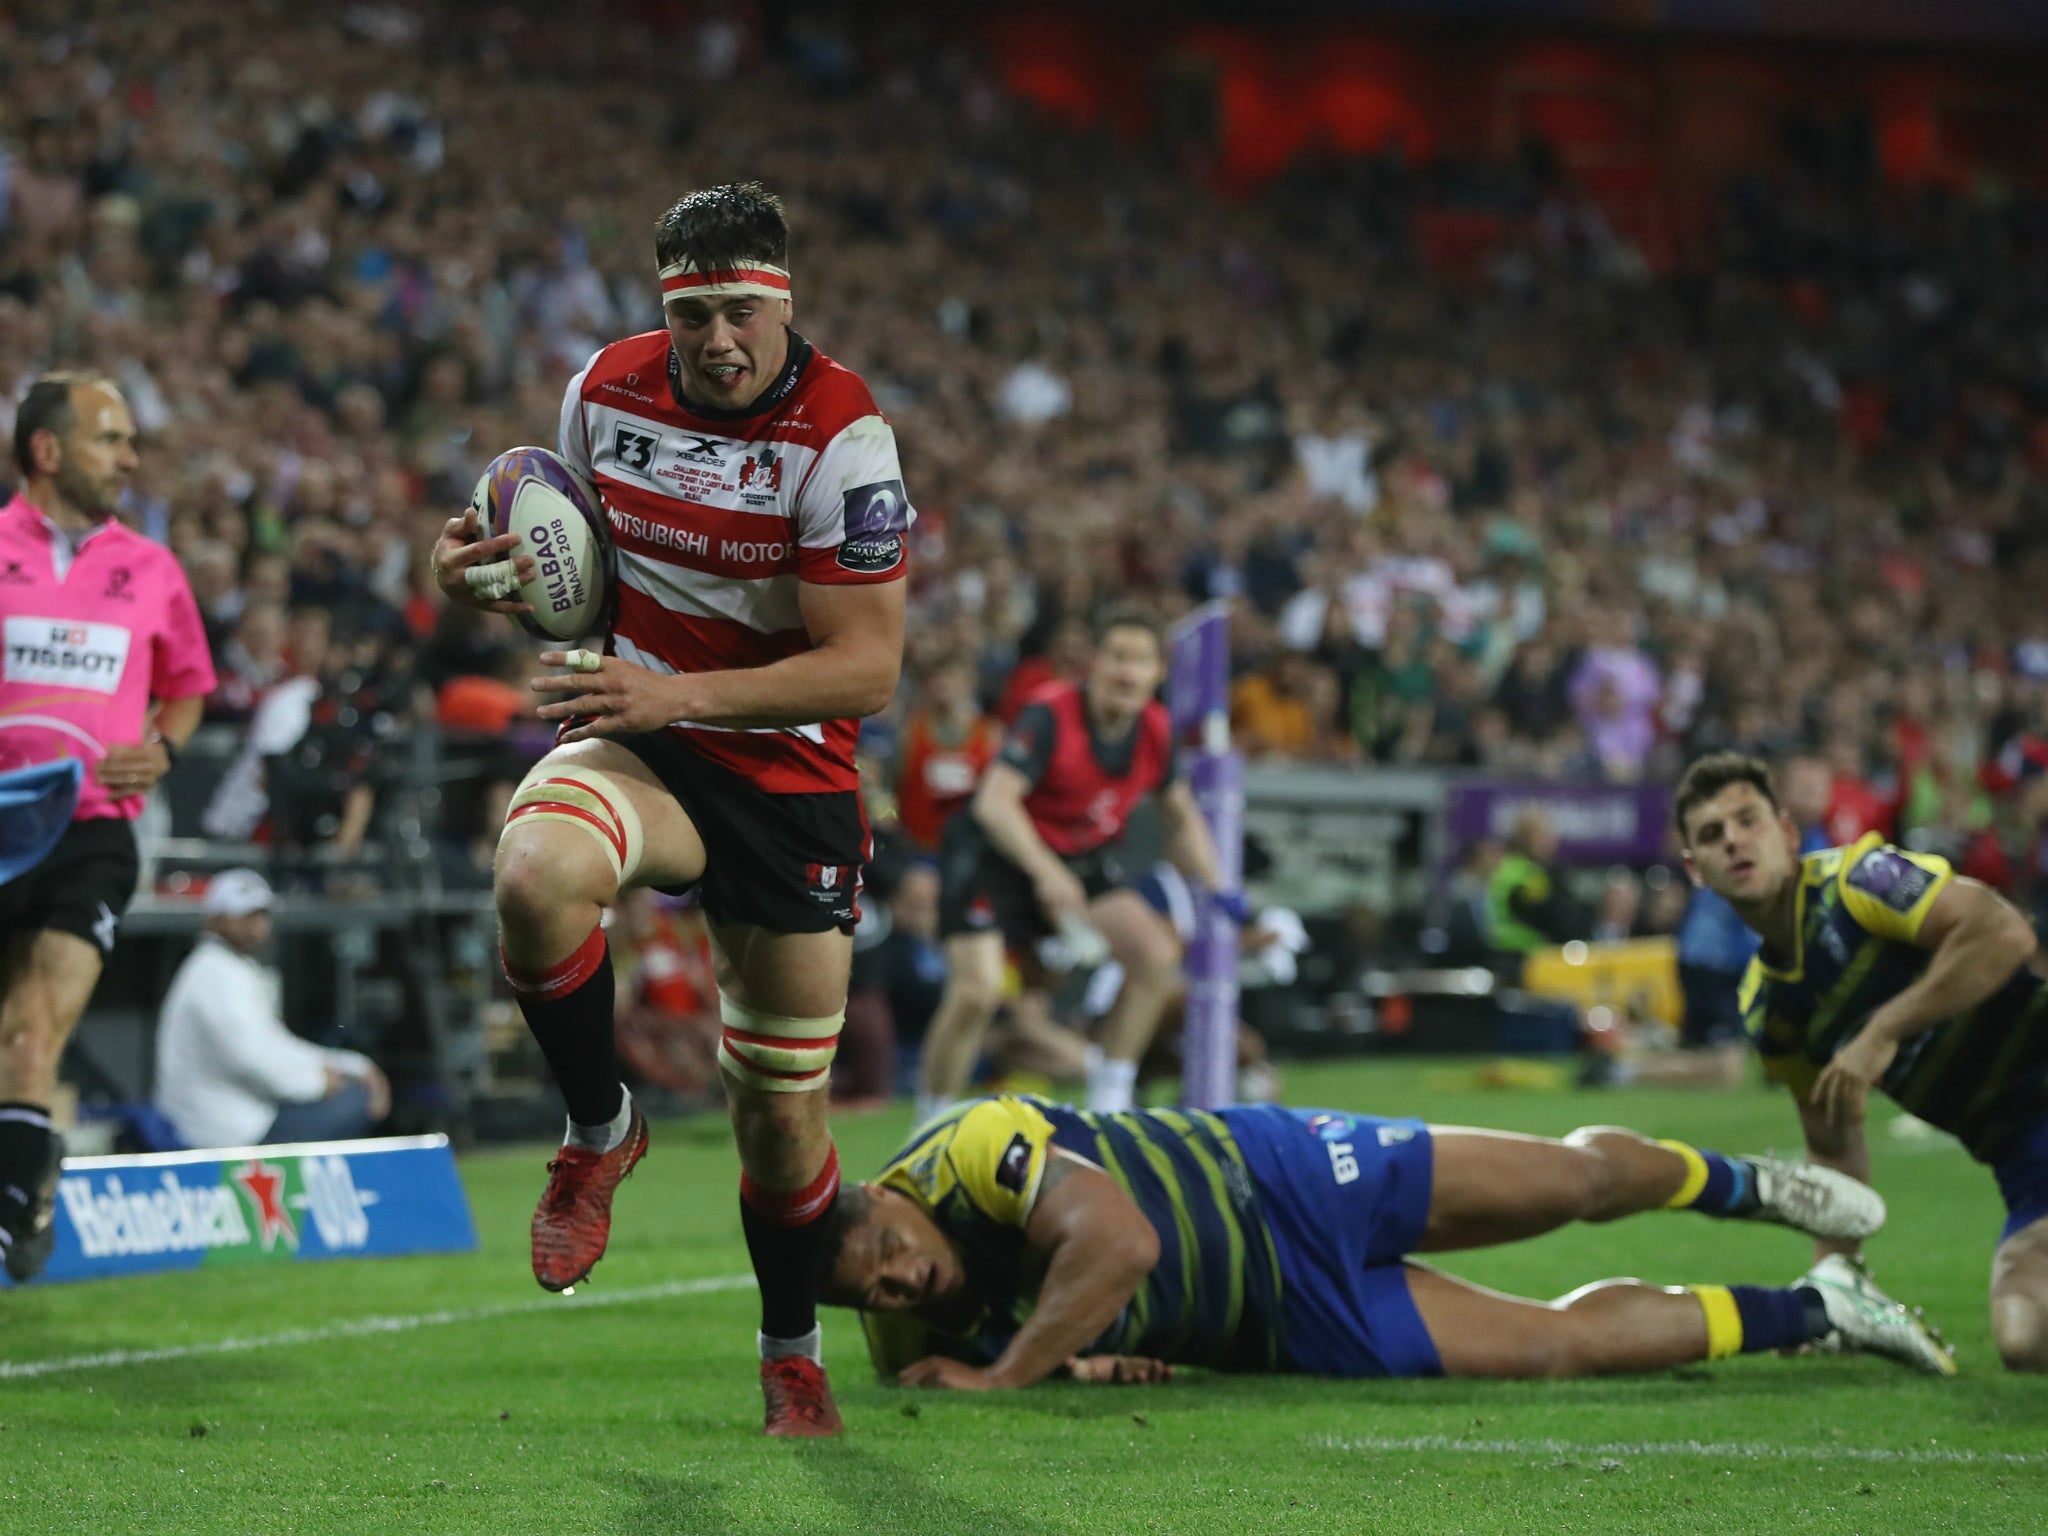 Lewis Ludlow saw his try for Gloucester ruled out for a forward pass by referee Jerome Garces